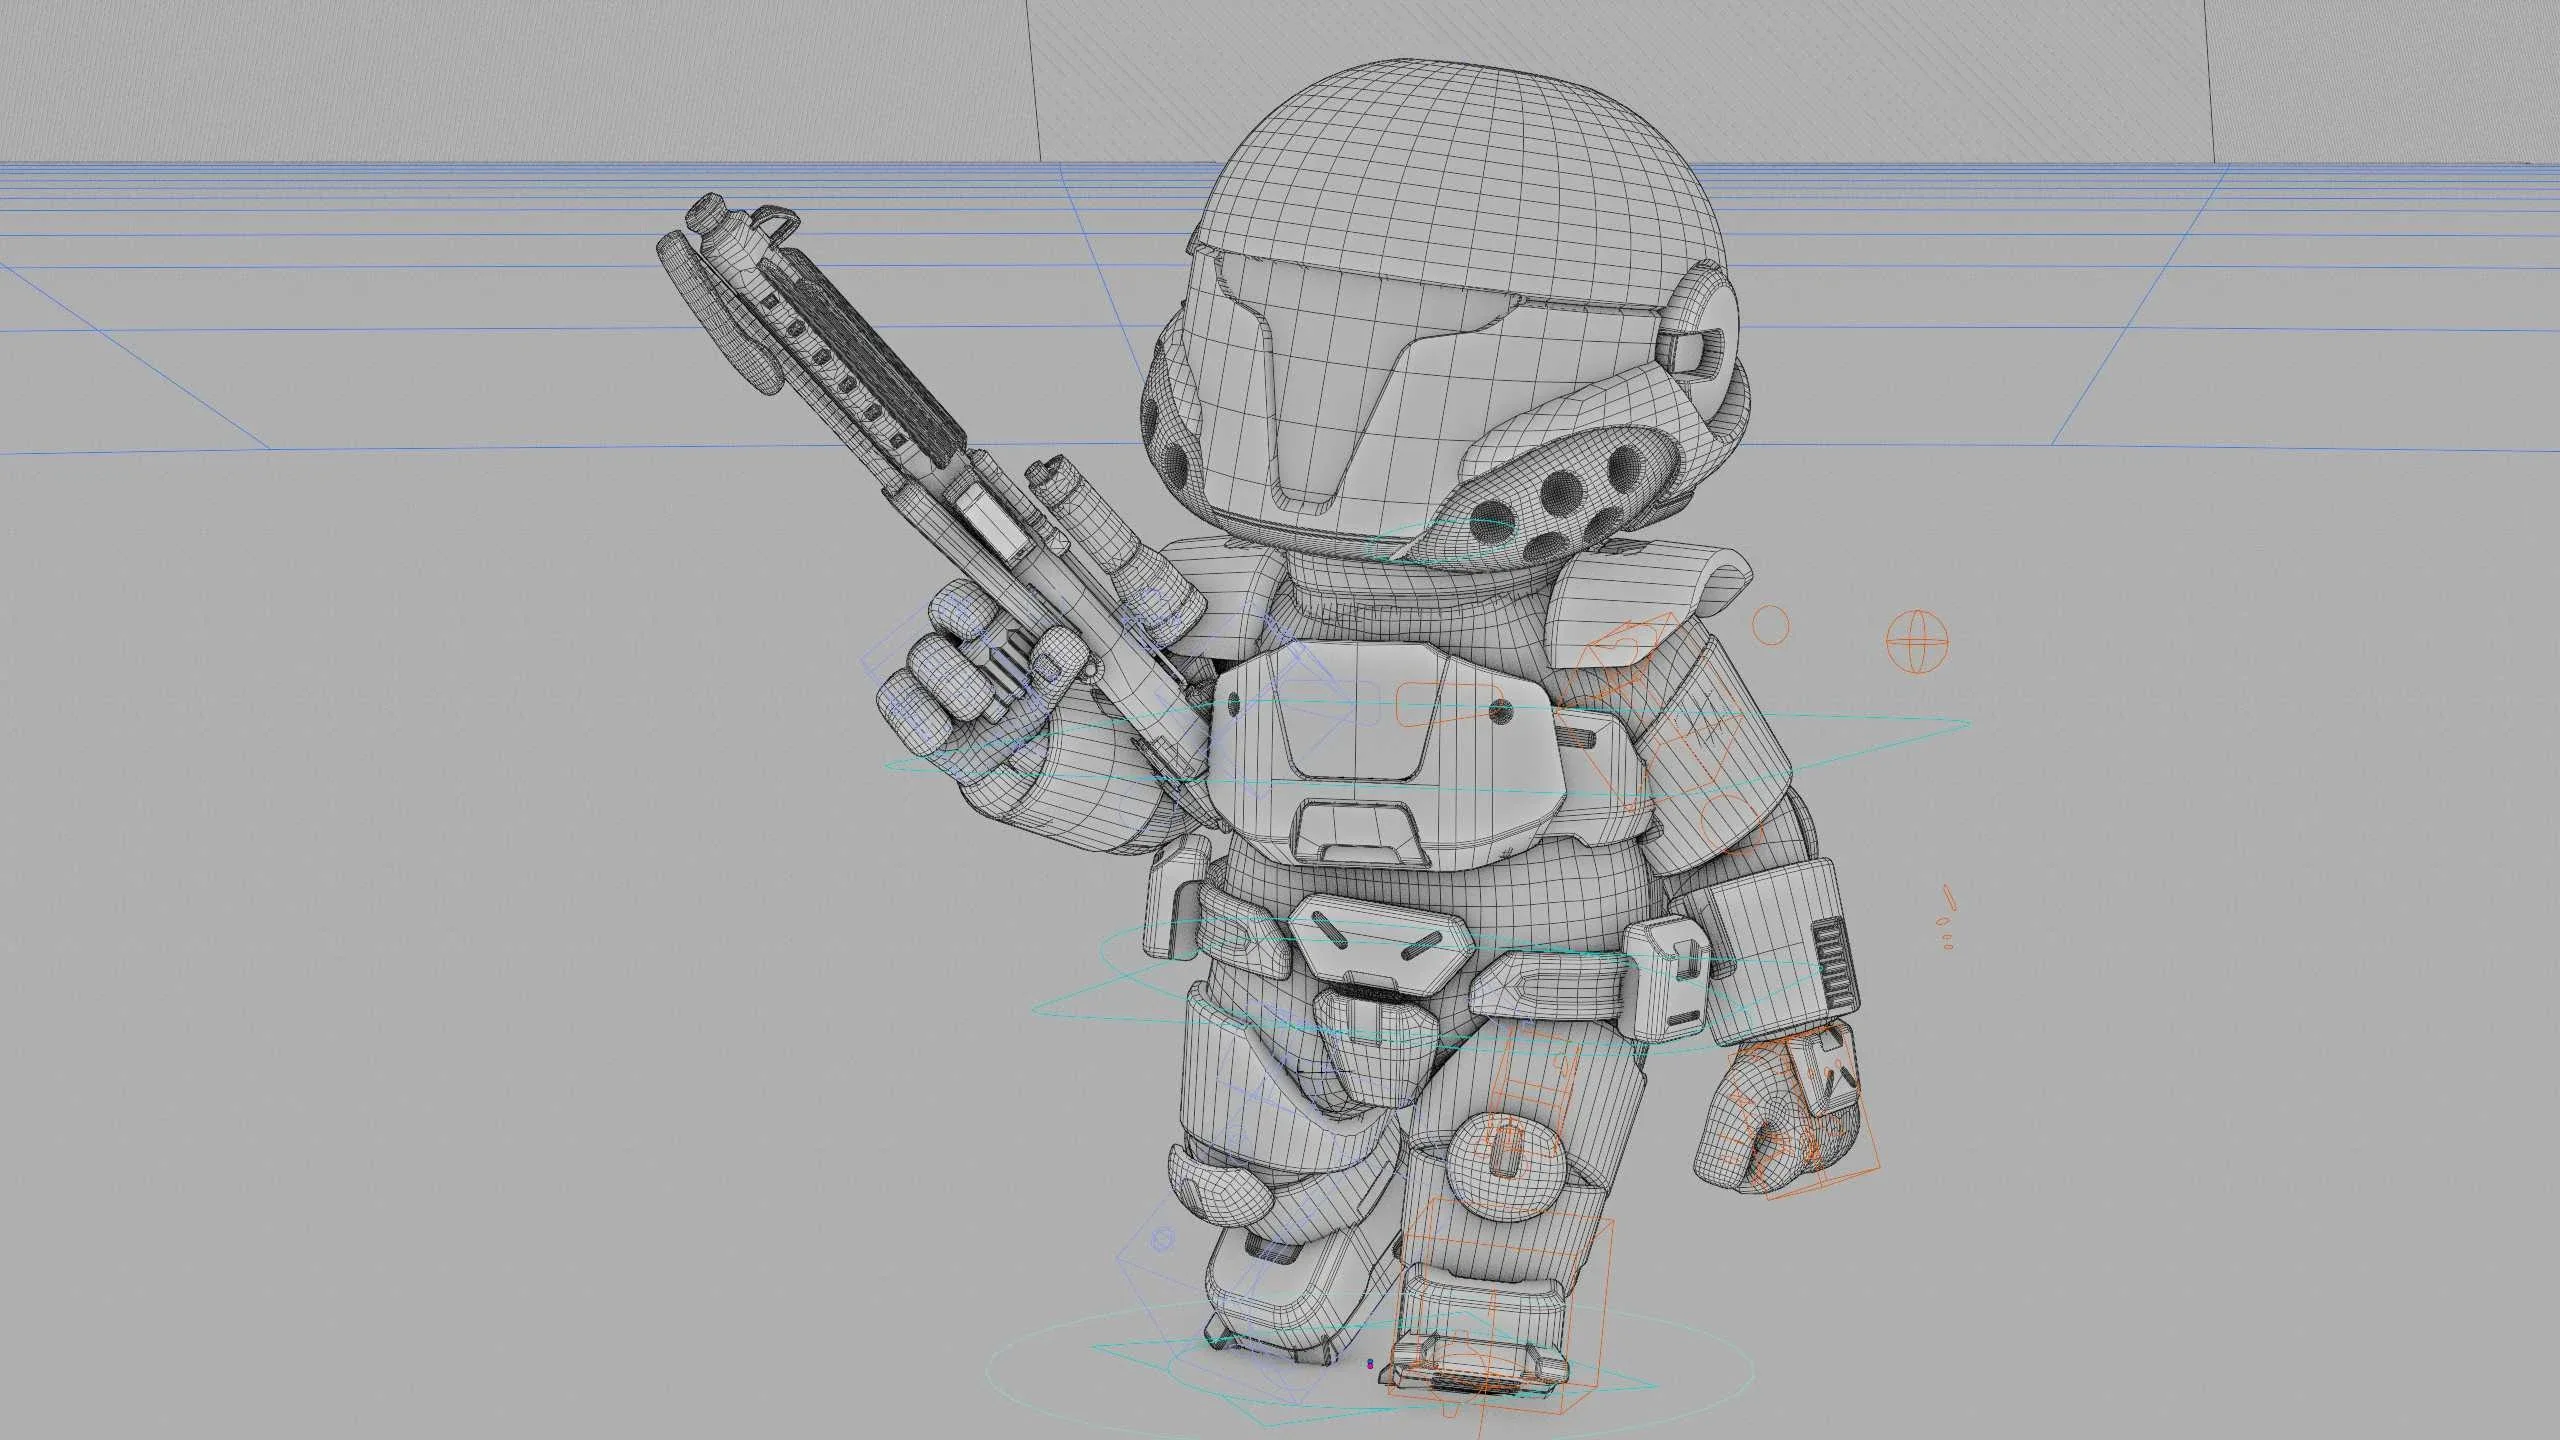 Toon Imperial Trooper R-C Auto-Rig Pro Rigged For Mixamo, Unreal Engine Unity